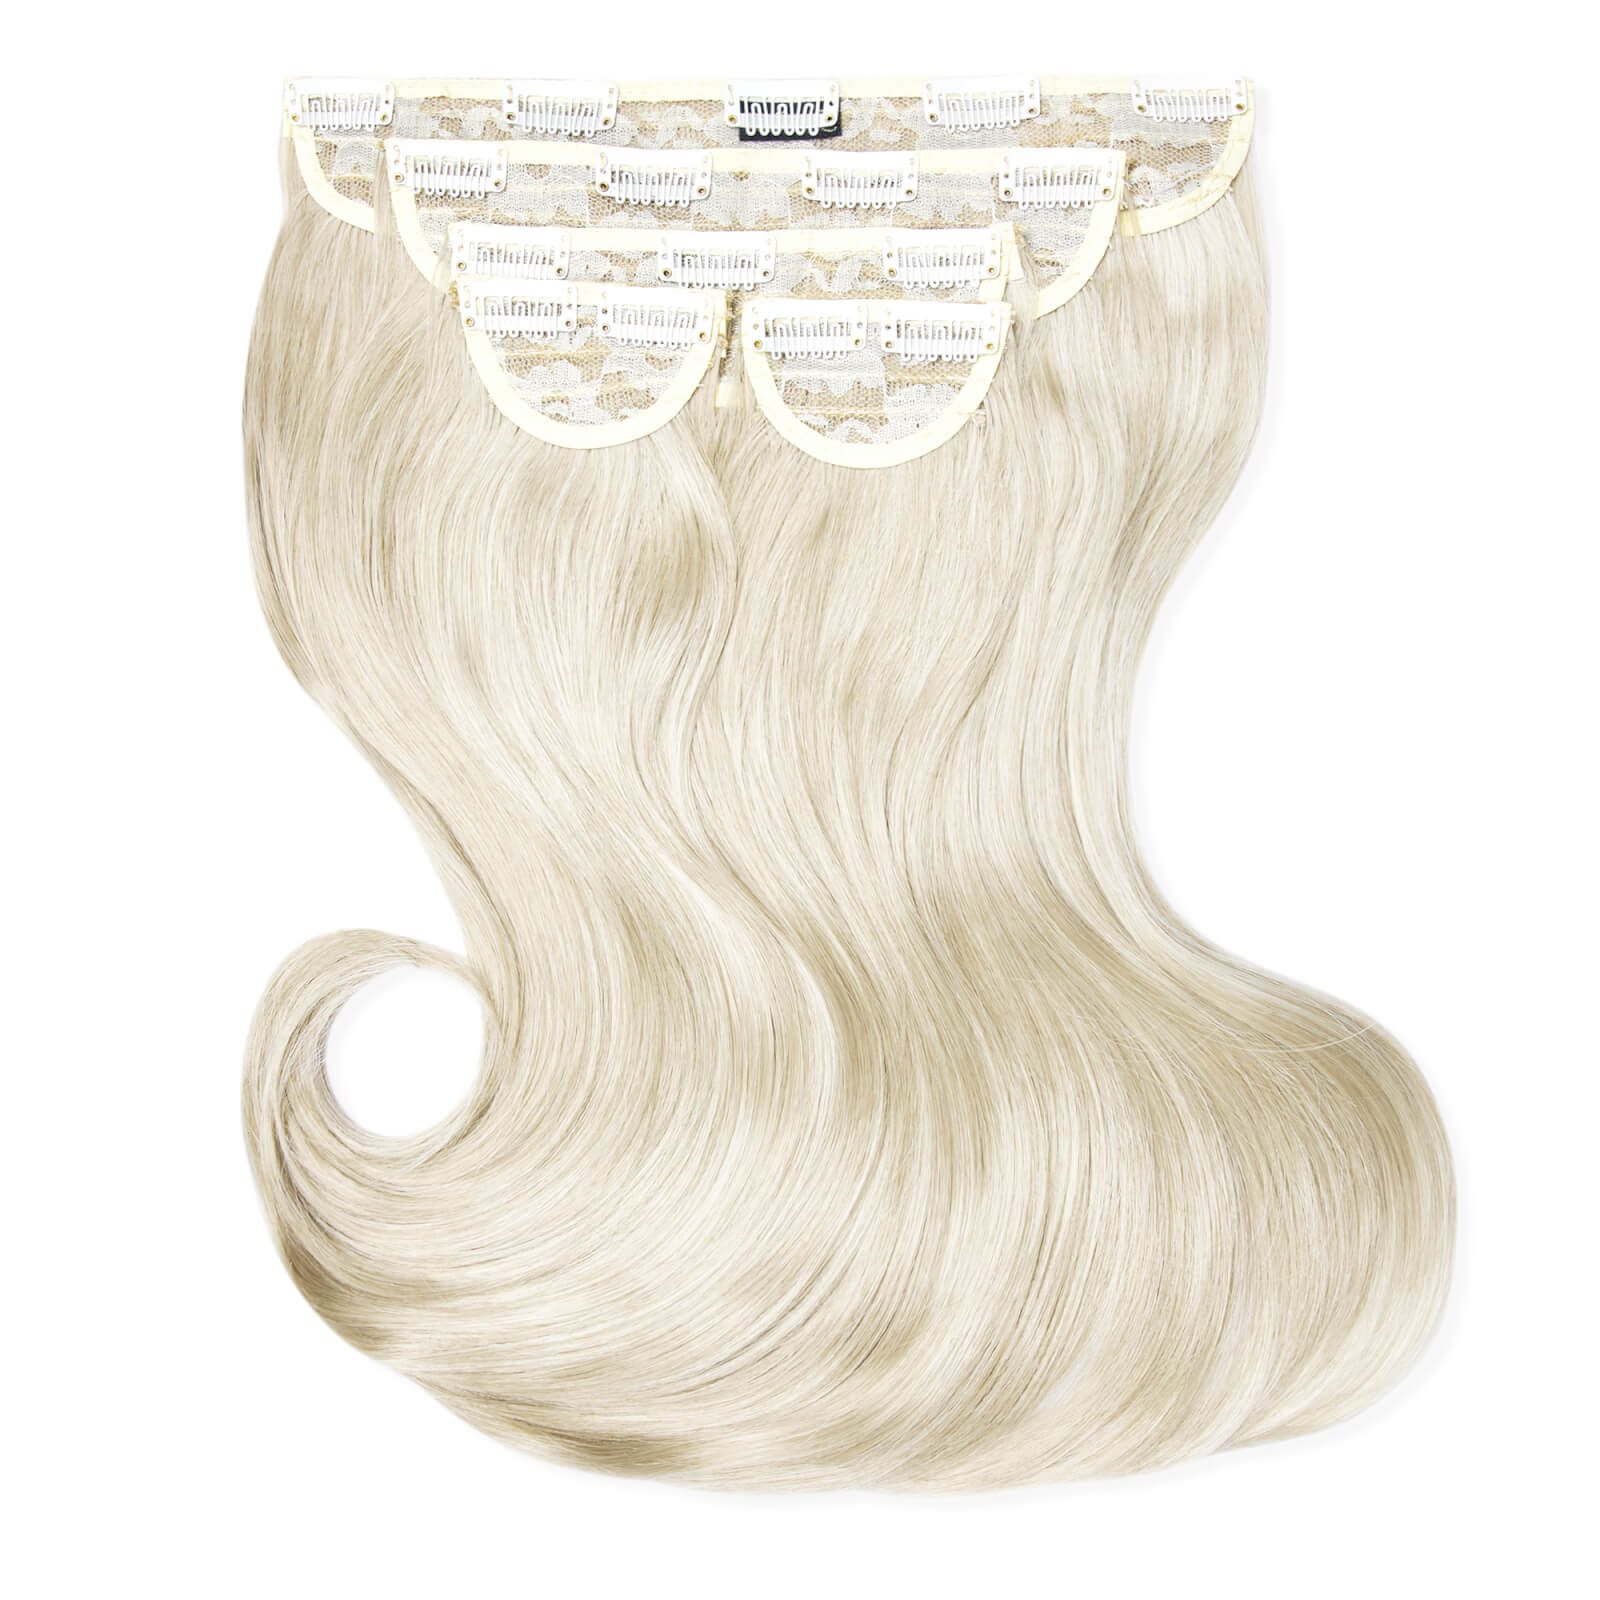 LullaBellz Super Thick 16 5 Piece Blow Dry Wavy Clip In Extensions (Various Shades) - Bleach Blonde - Natural Black